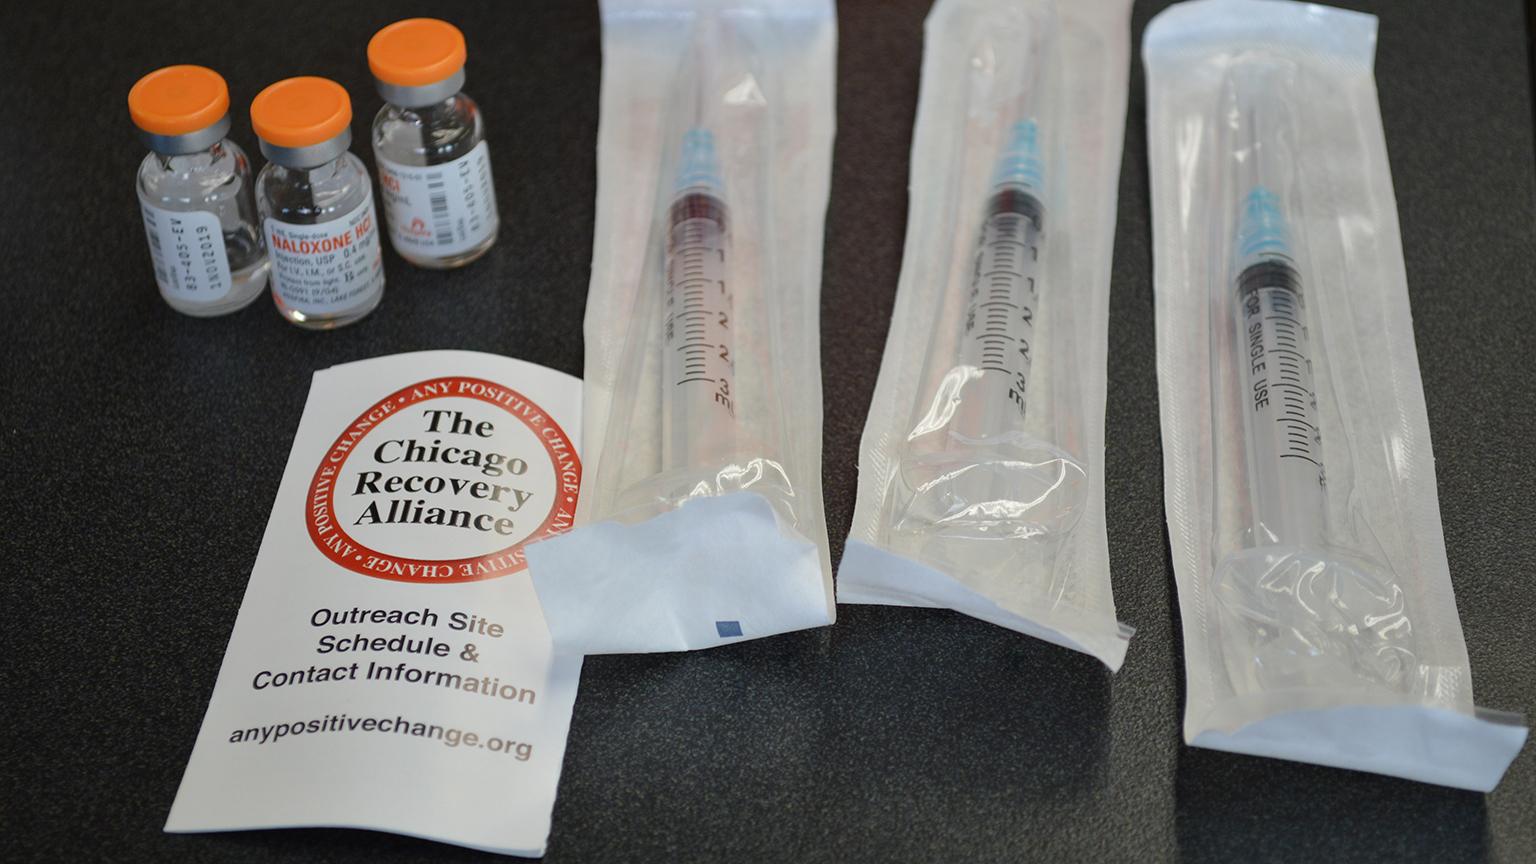 Each naloxone kit contains three vials of naloxone, three syringes and a CRA card to inform people about their services, including its silver van that carries naloxone and other supplies for safer drug use. (Kristen Thometz / Chicago Tonight)